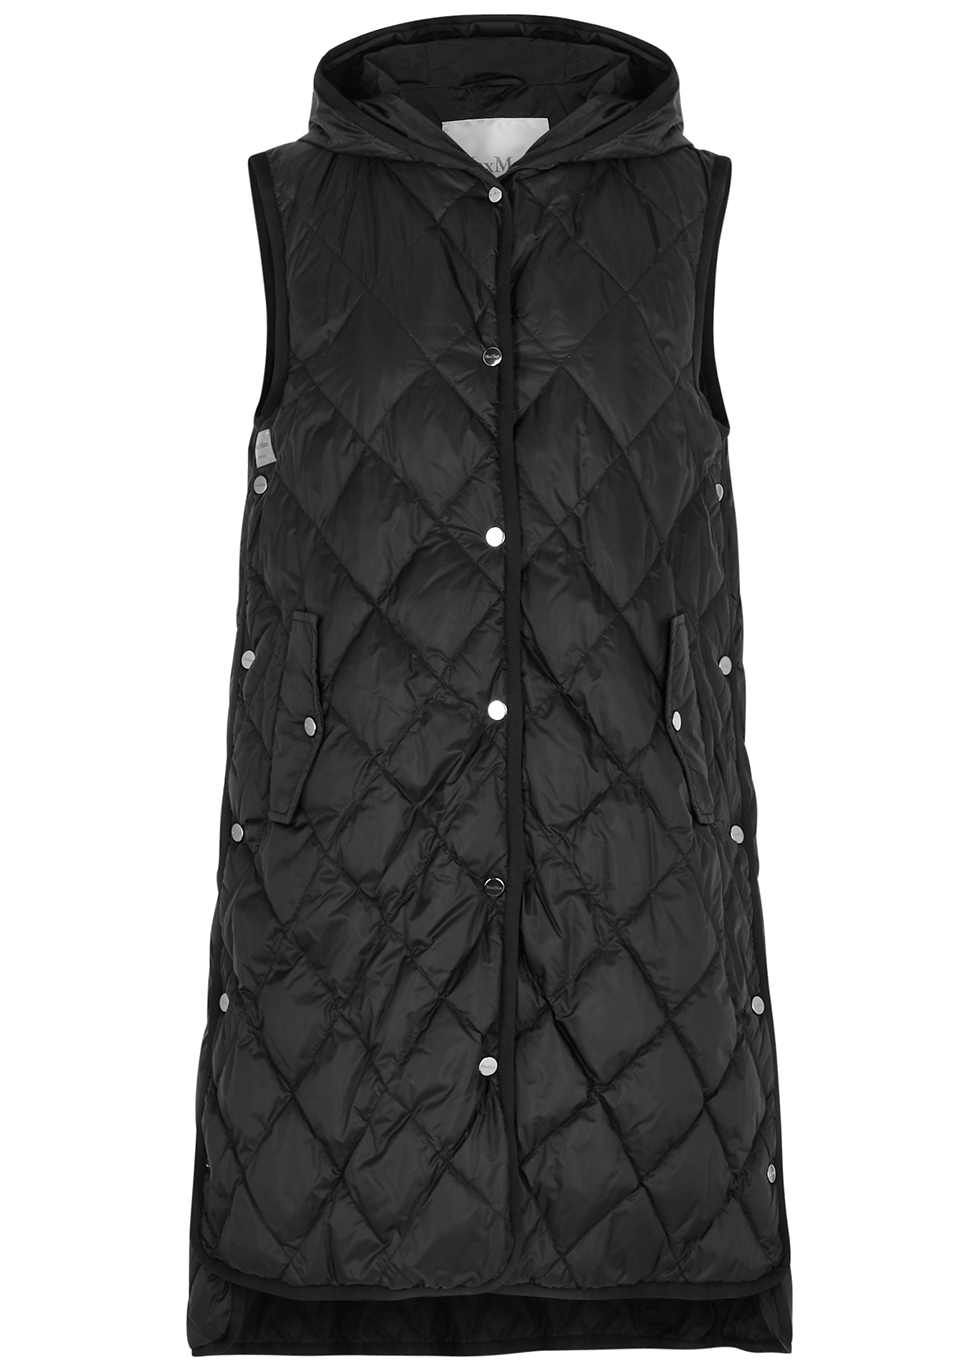 Etreti black quilted shell gilet